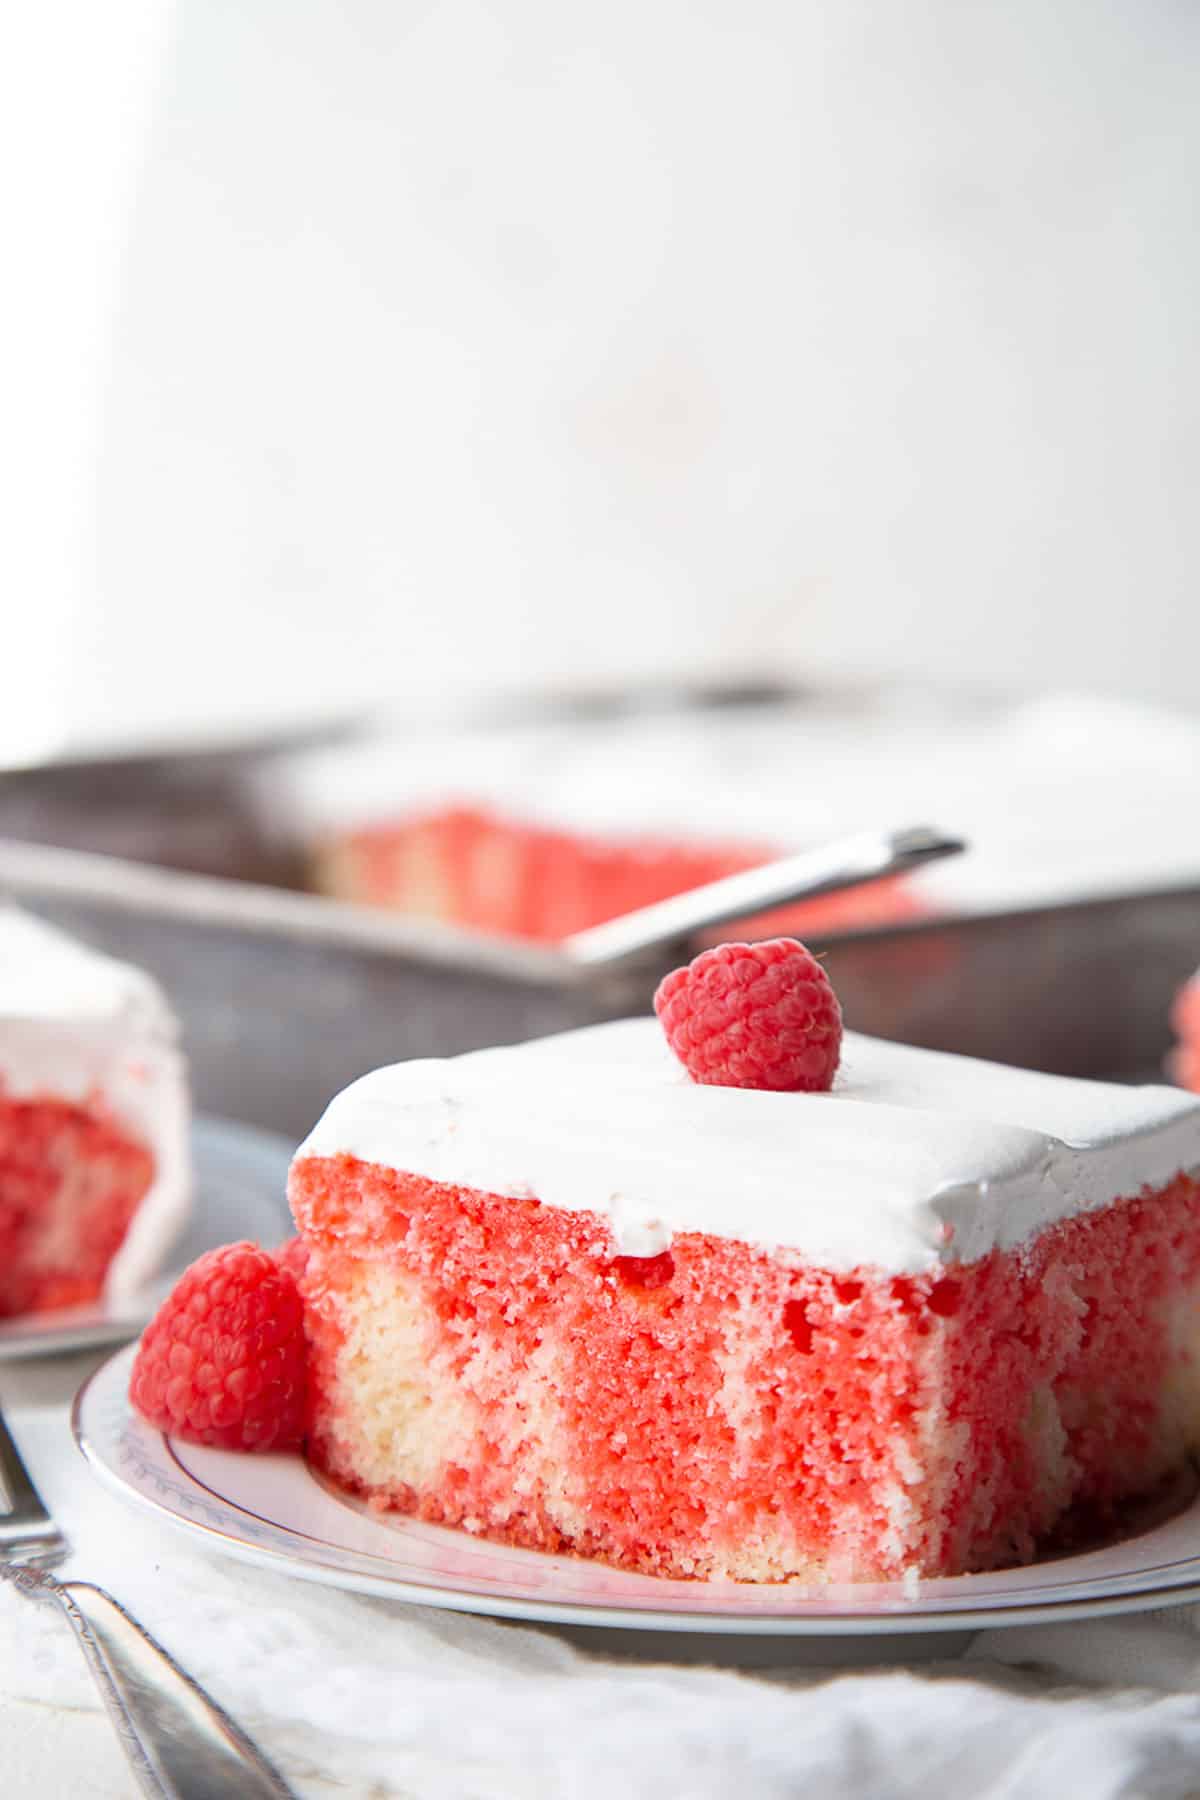 slice of jello poke cake with red jello, topped with a layer of whipped cream and a raspberry.